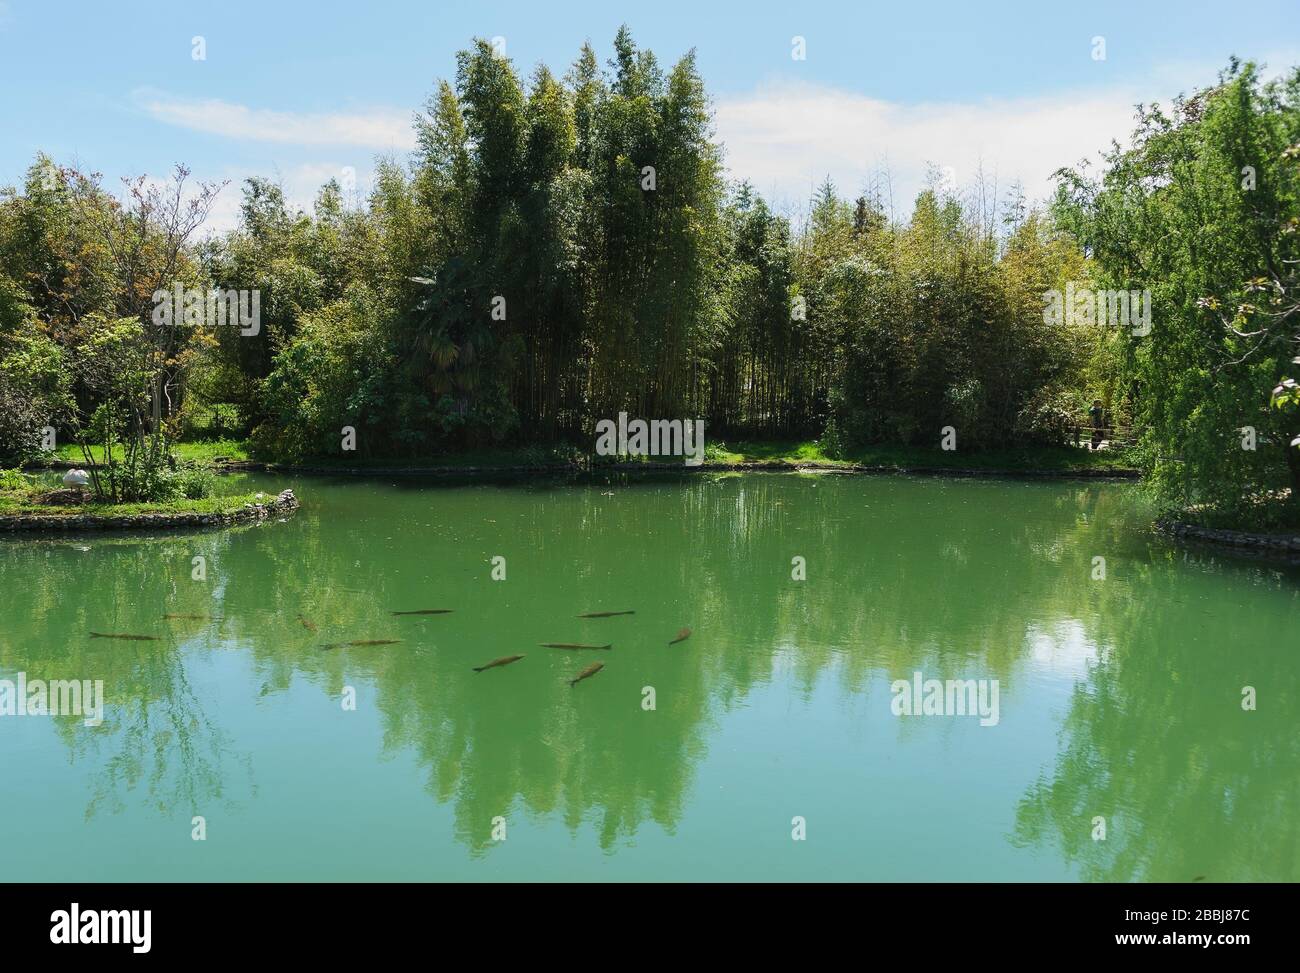 Pond in the old city Park. In water, visible school of fish - carp (lat. Ctenopharyngodon idella) Stock Photo